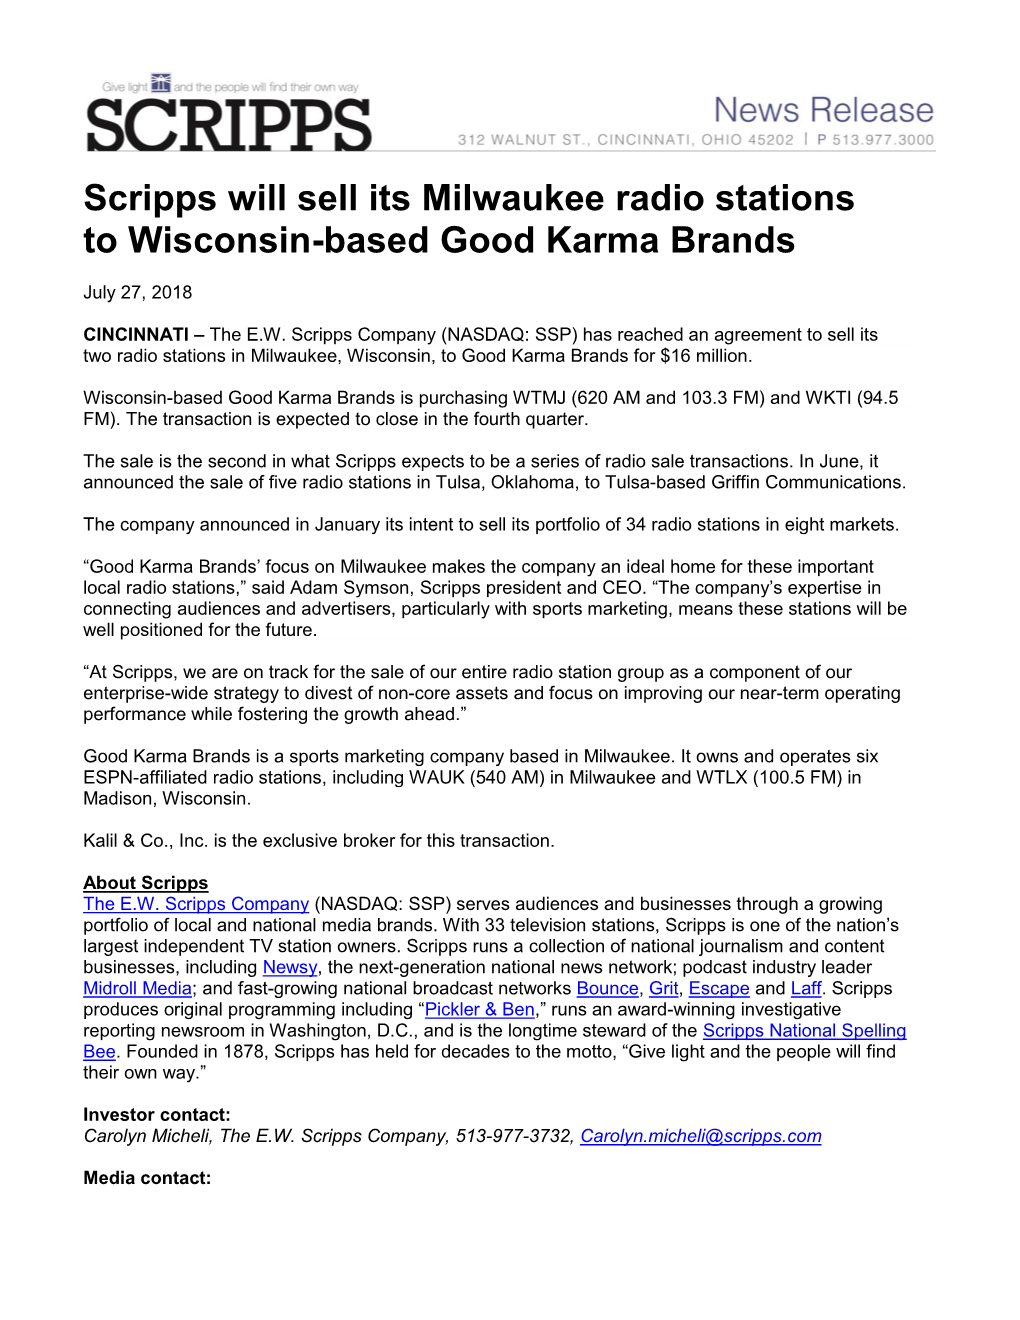 Scripps Will Sell Its Milwaukee Radio Stations to Wisconsin-Based Good Karma Brands